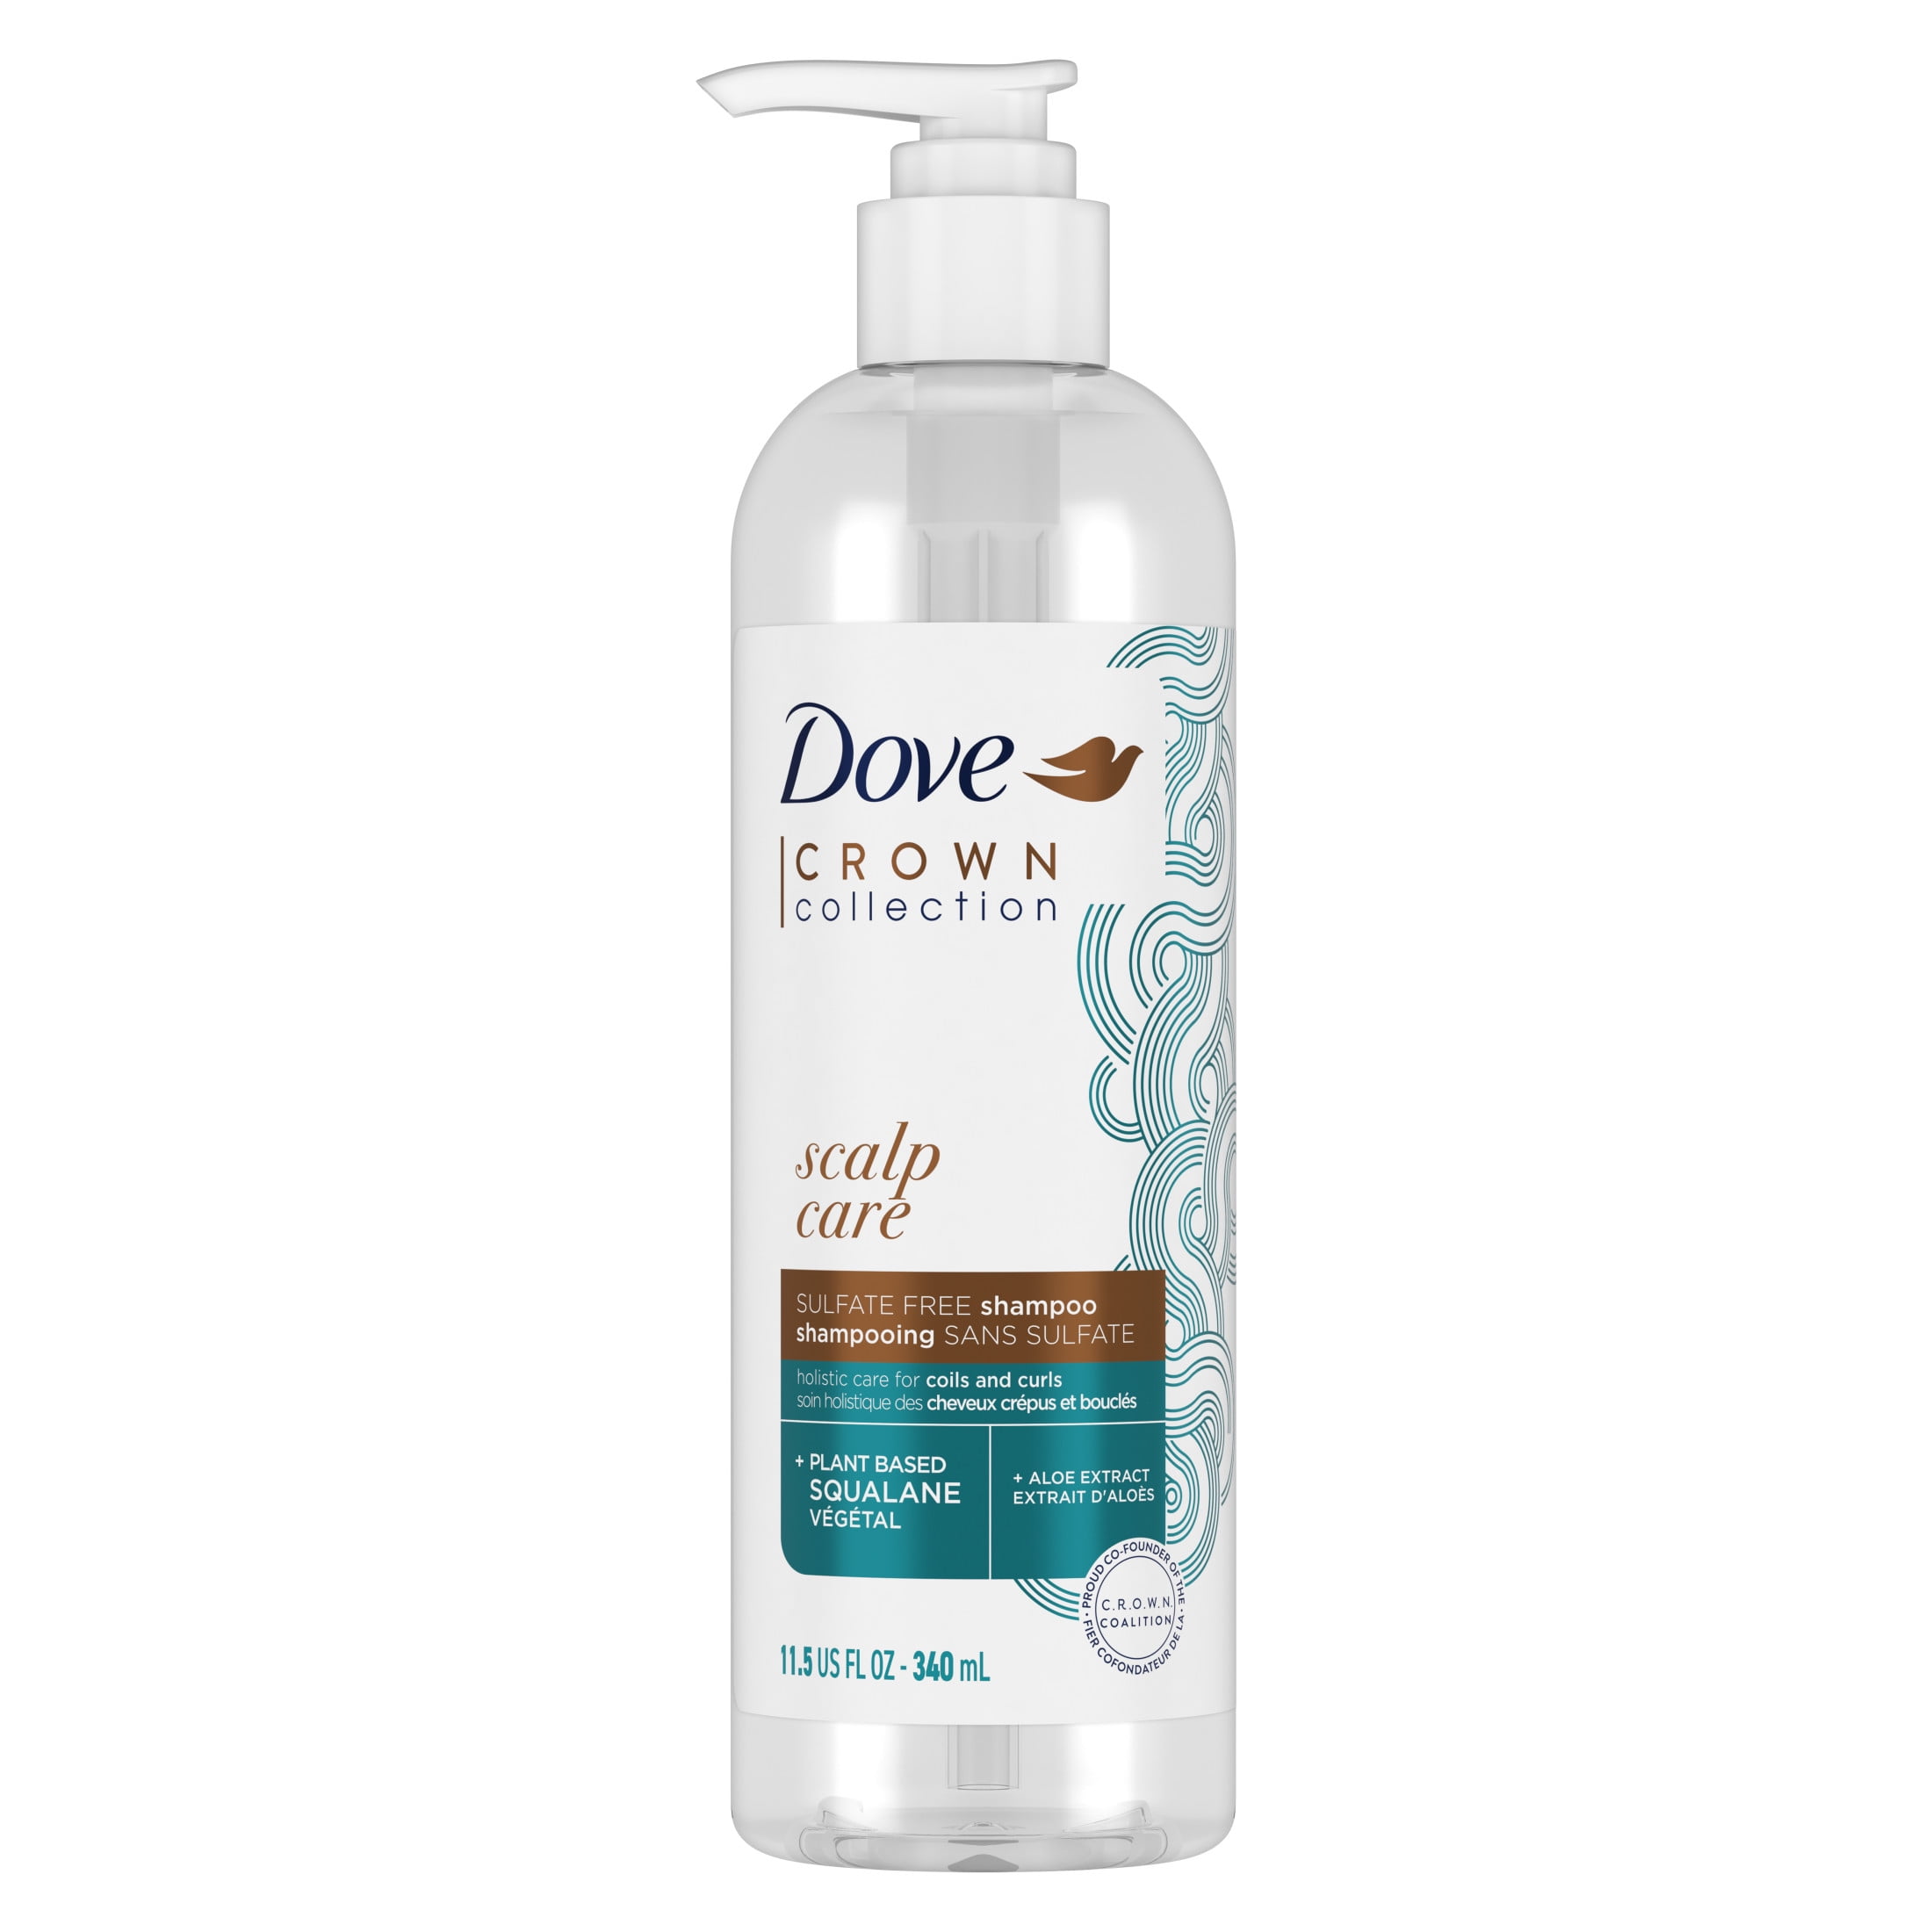 Dove CROWN Collection Holistic Hair Care Scalp Care, 11.5 oz